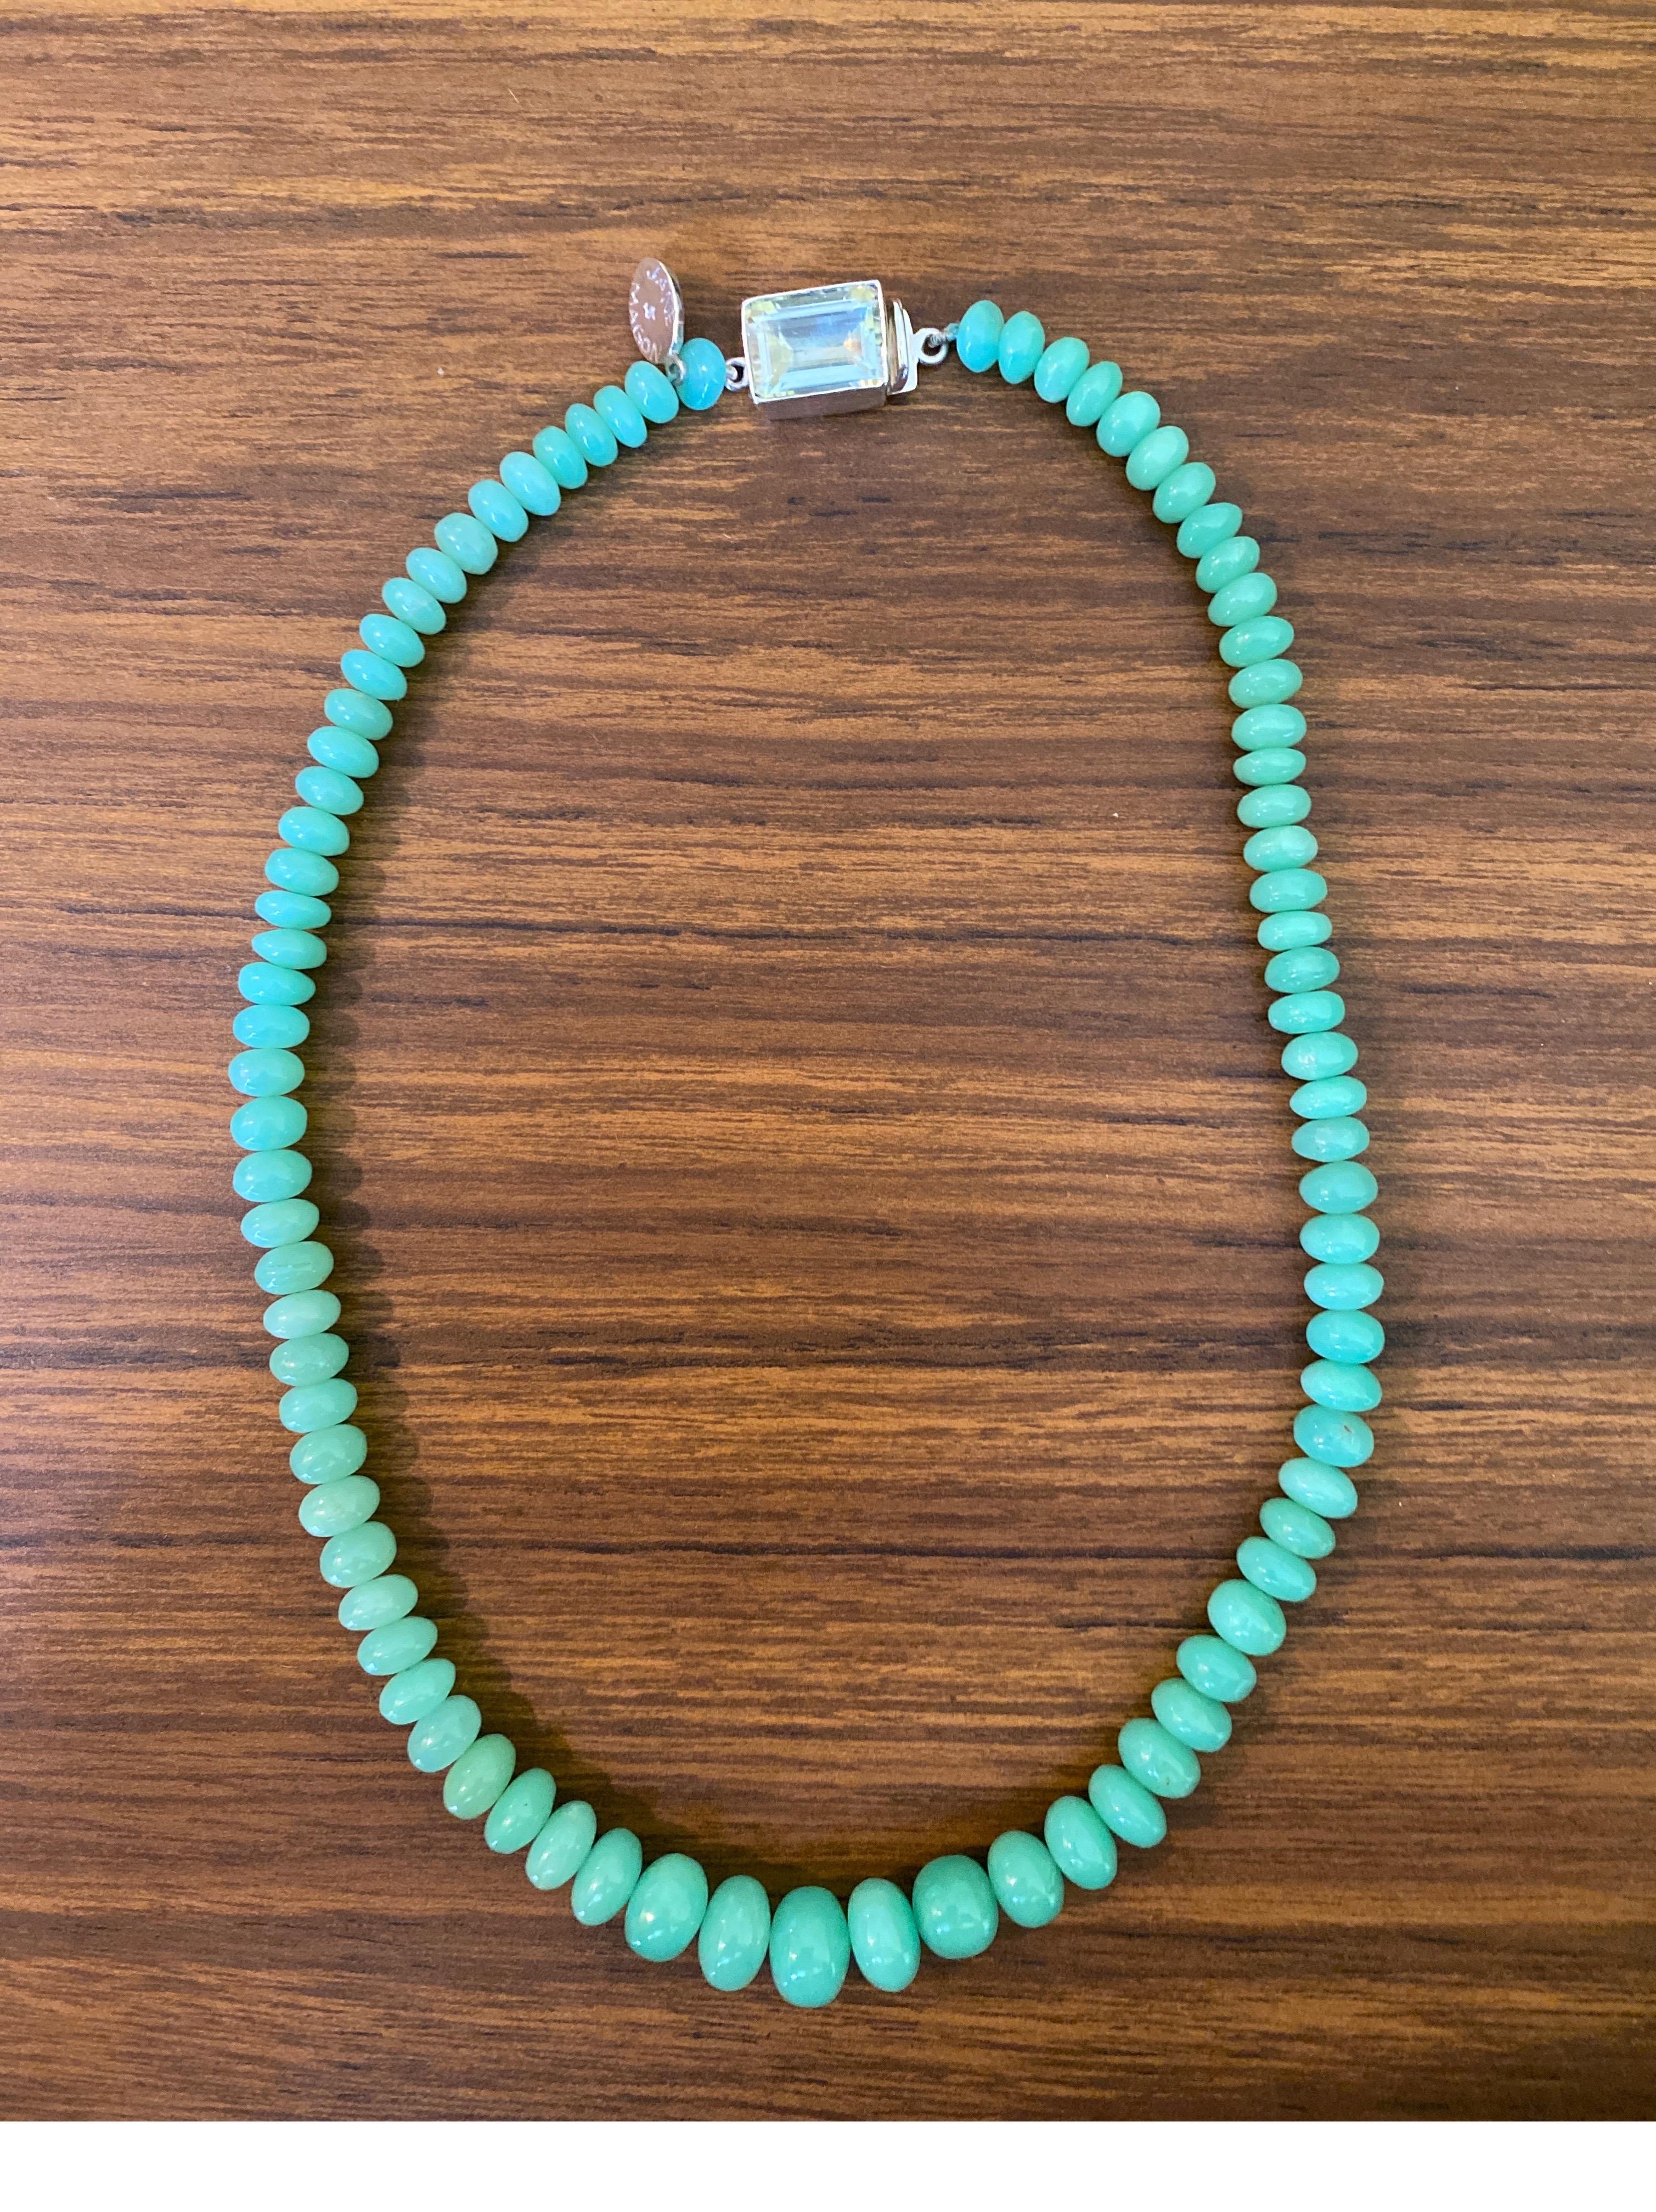 Green Apple Chrysoprase Necklace with a Green Amethyst Sterling Silver Clasp For Sale 1